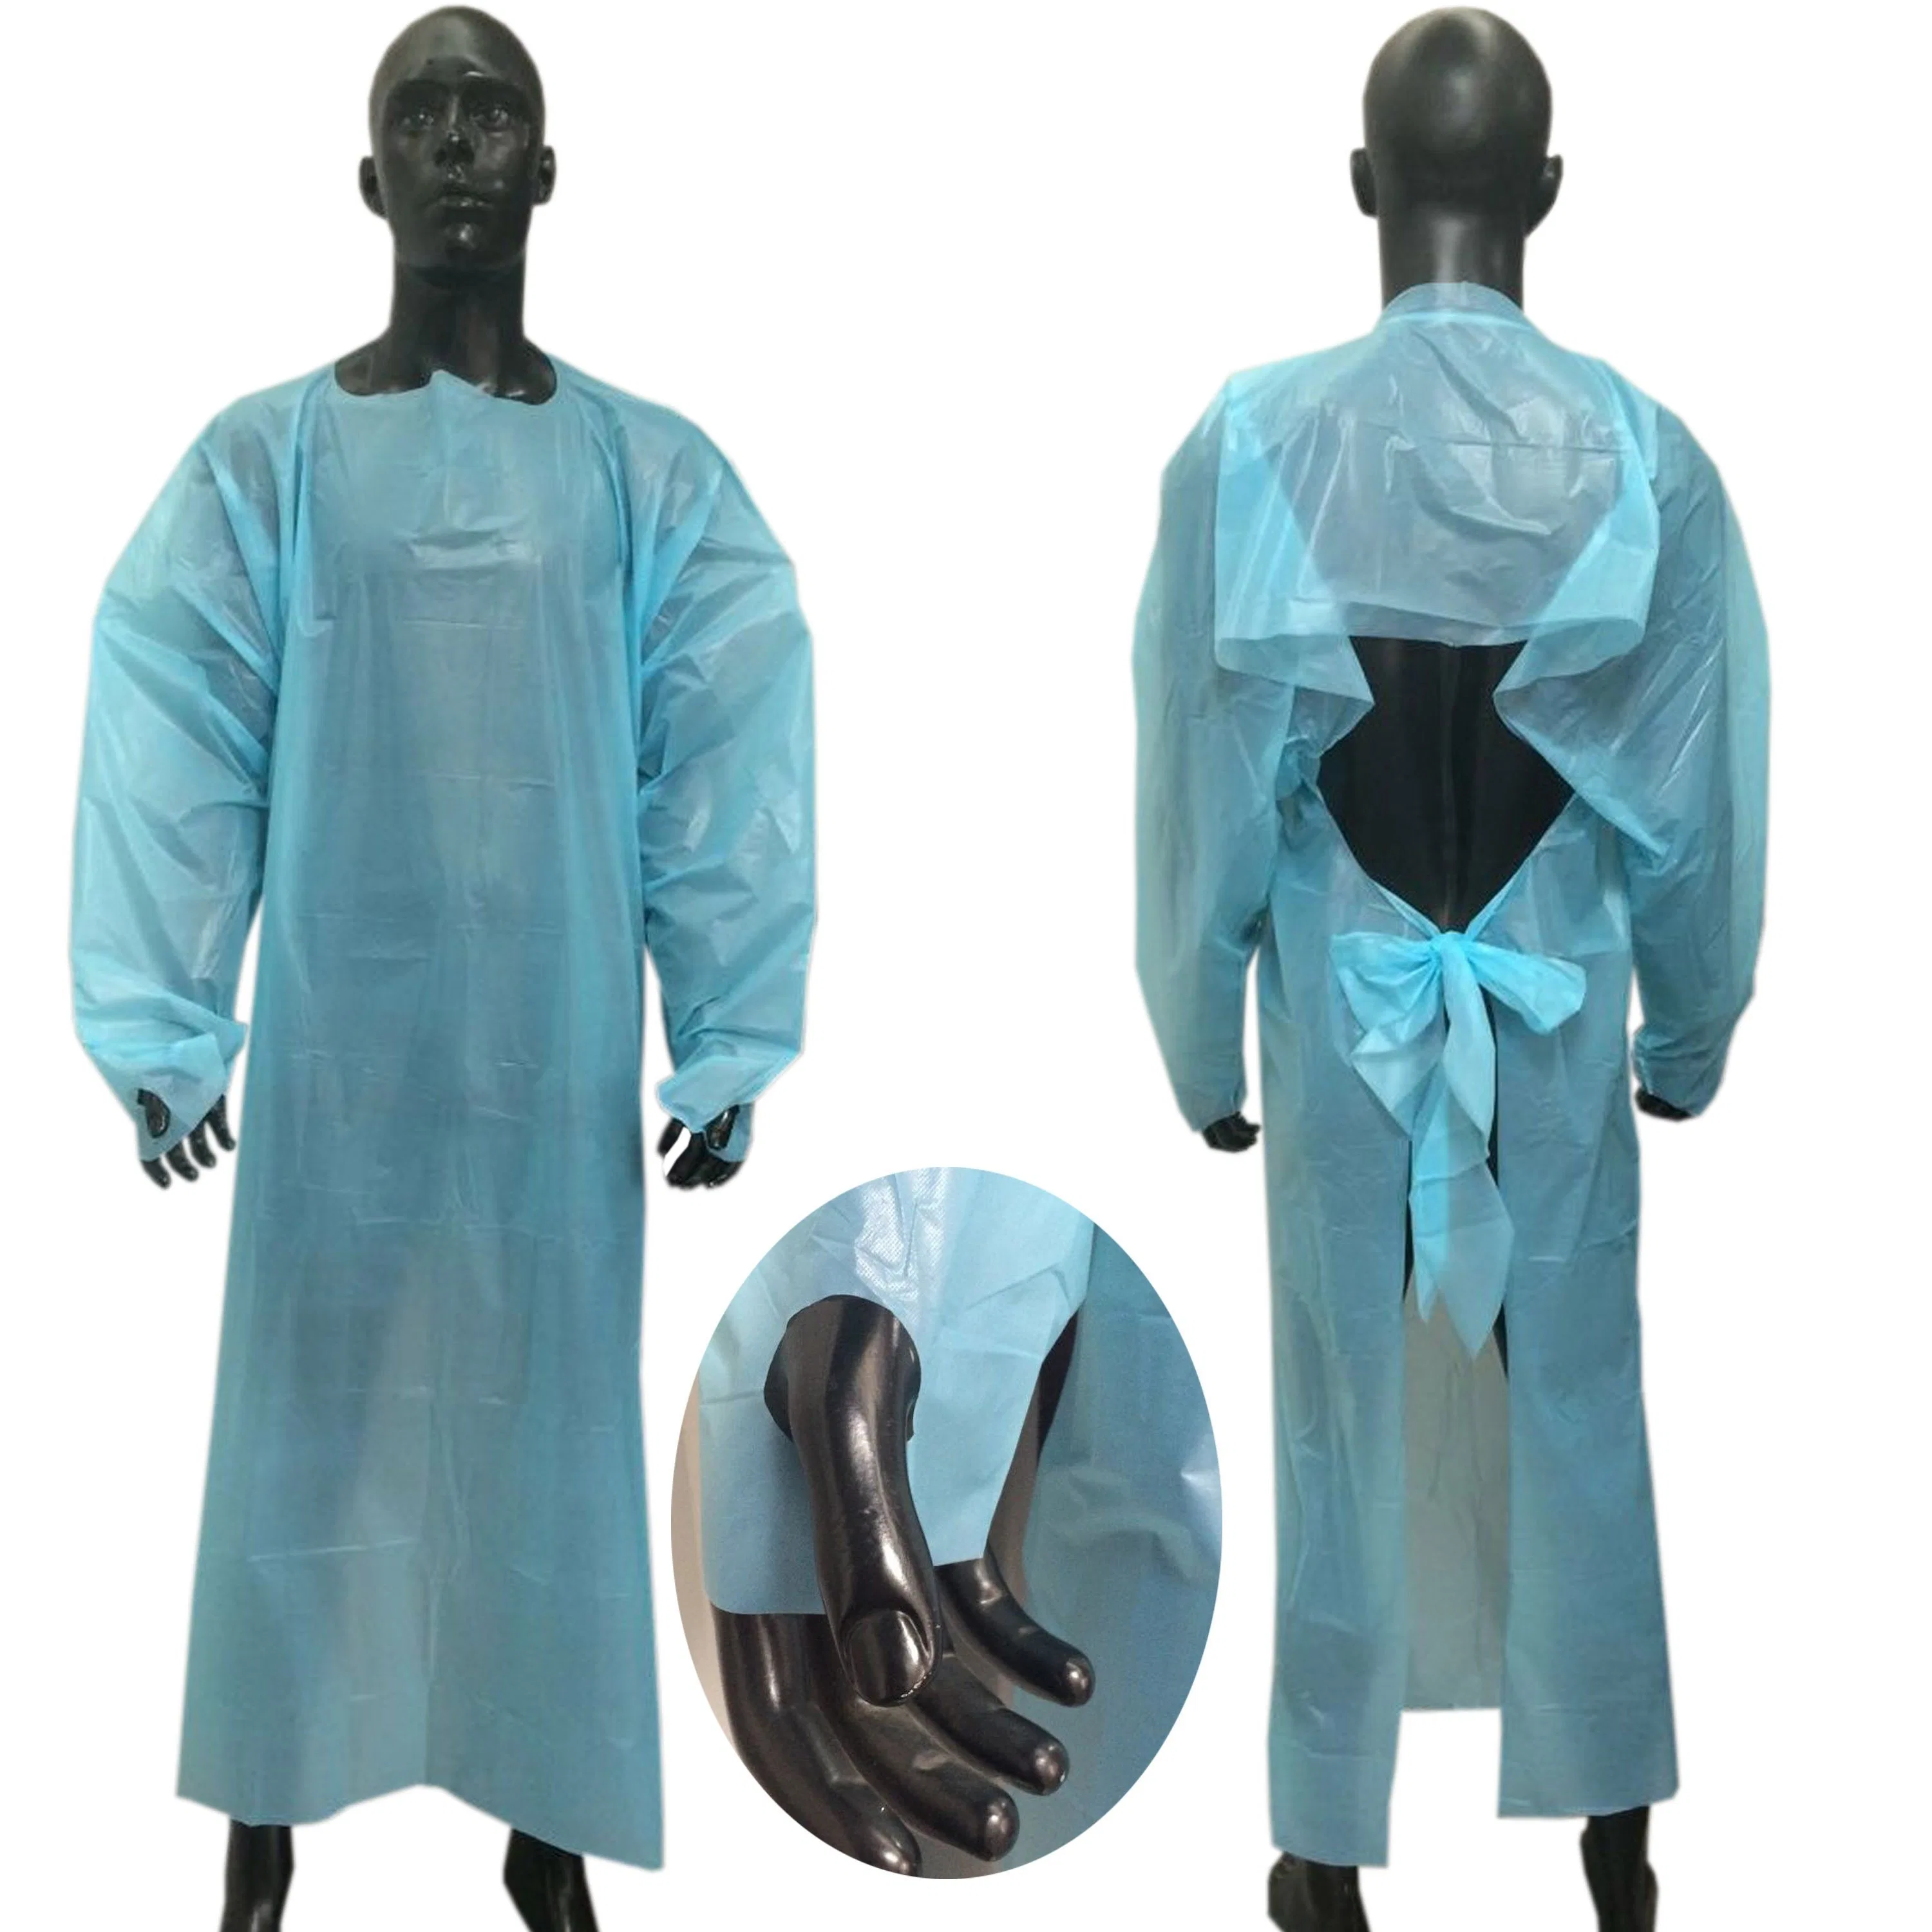 Thumb Loop Disposable CPE Isolation Gown for Protection